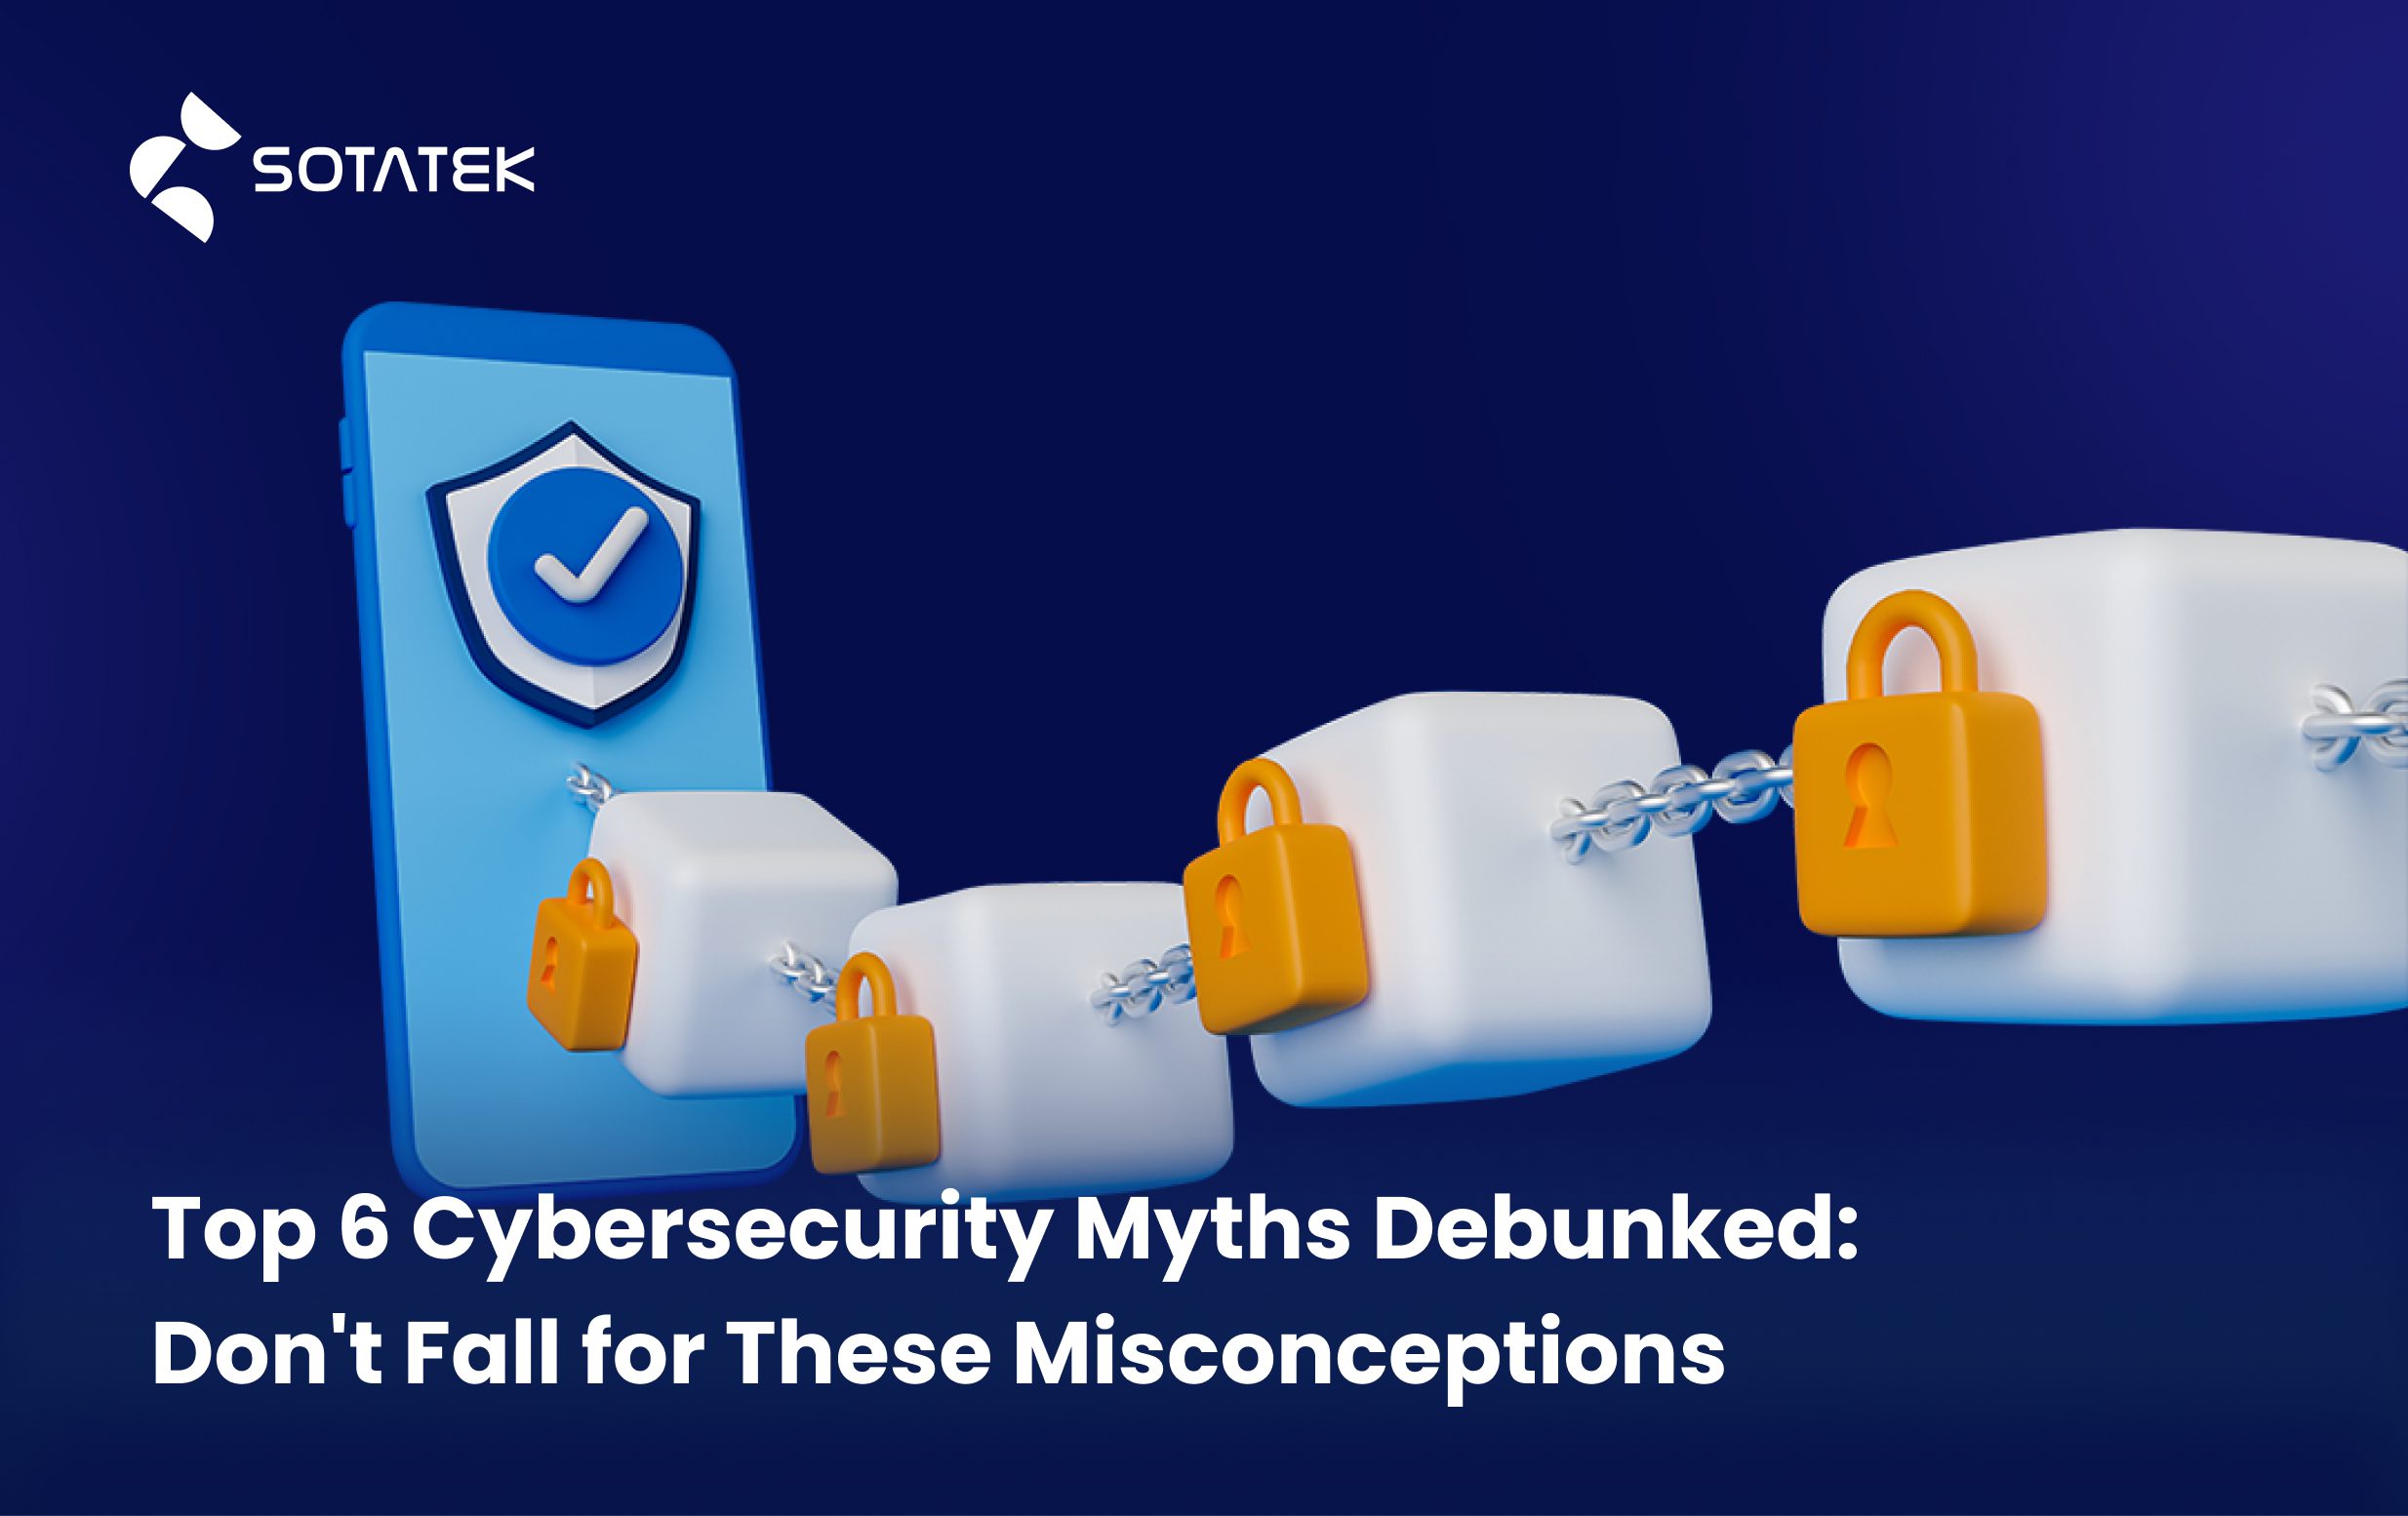 Top 6 Cybersecurity Myths Debunked